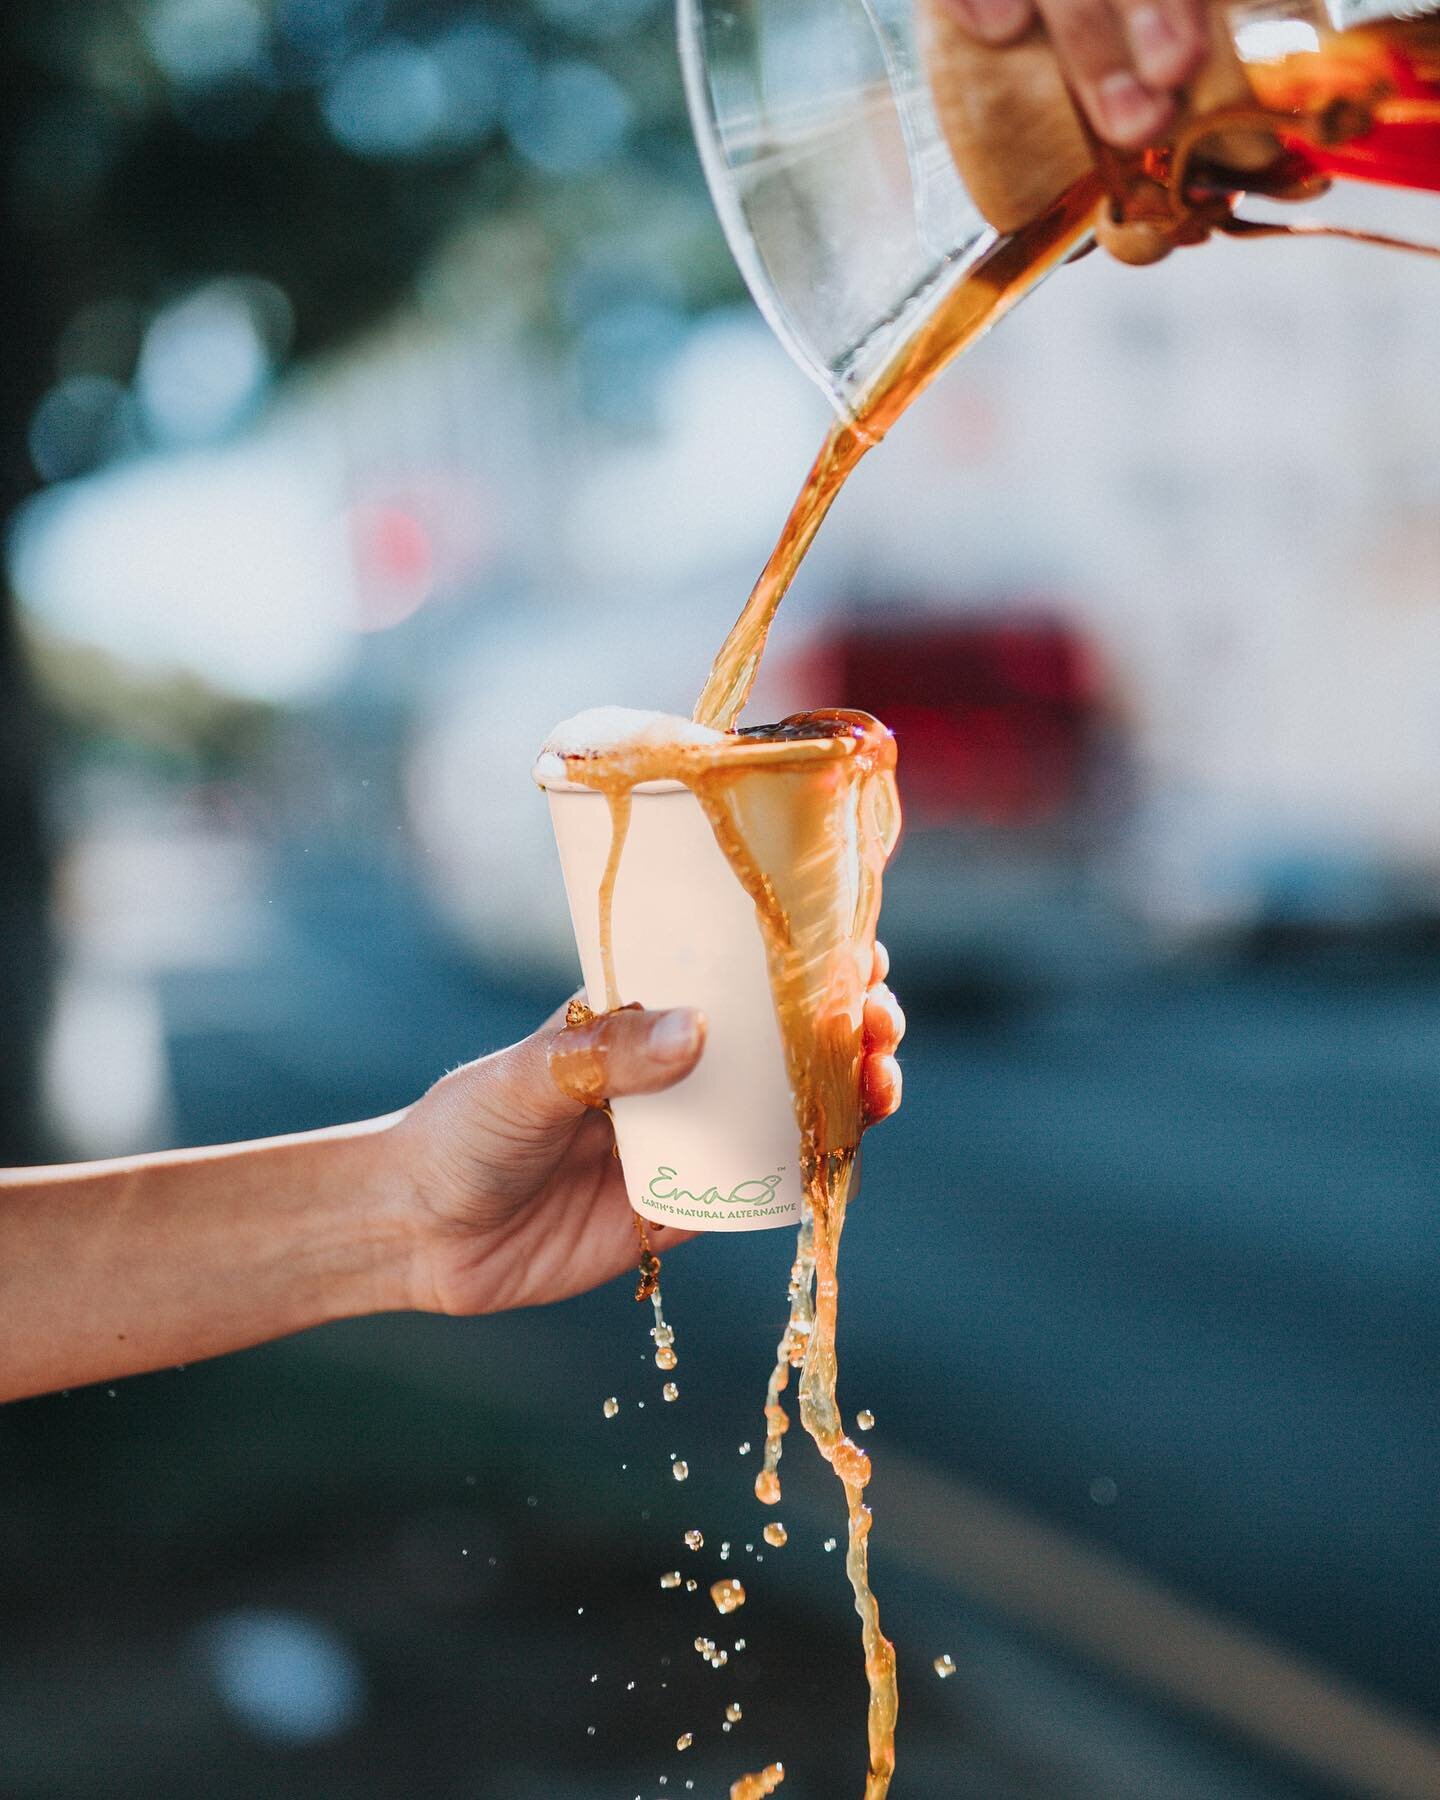 Life could be messy. But not our cups. So, Pour-Drink-Repeat.

👉Visit enaecogood.com, and enjoy 18% off with any purchase over $17.76! Use code &ldquo;JULY422&rdquo;! 

#ecofriendly #environmentfriendly #compostable #biodegradable #savetheplanet #sa